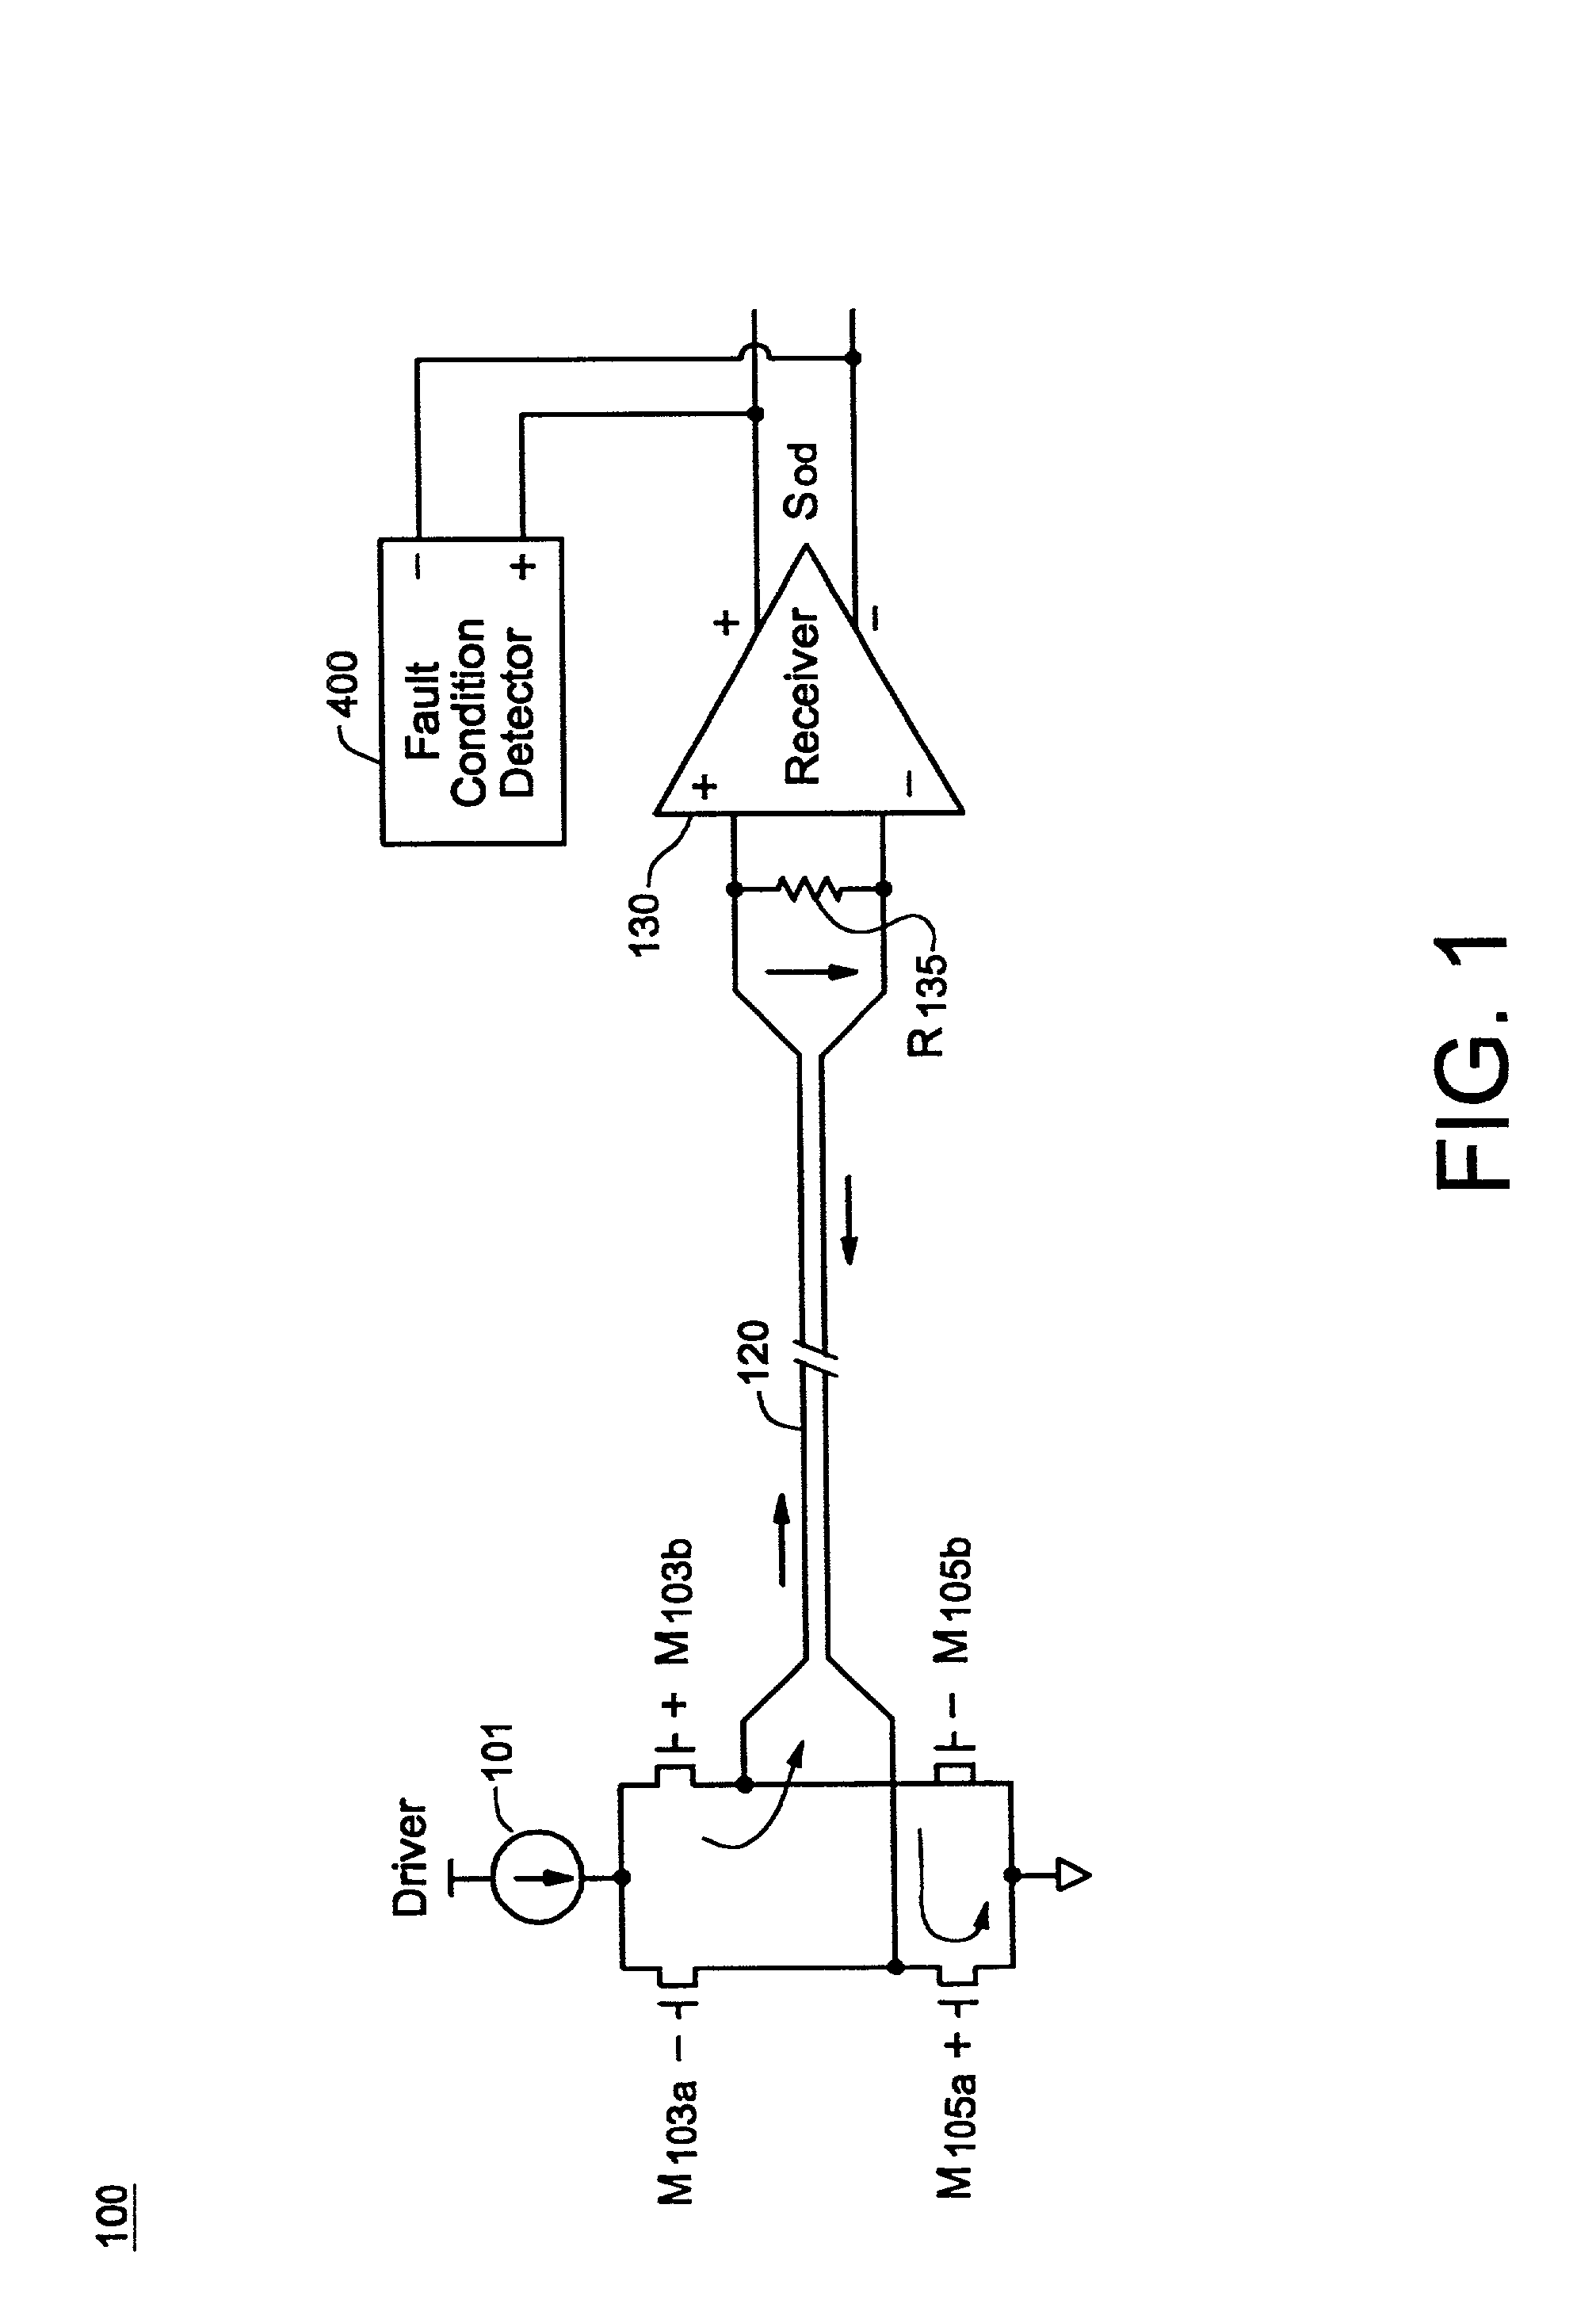 Apparatus and method for detecting a fault condition in a common-mode signal